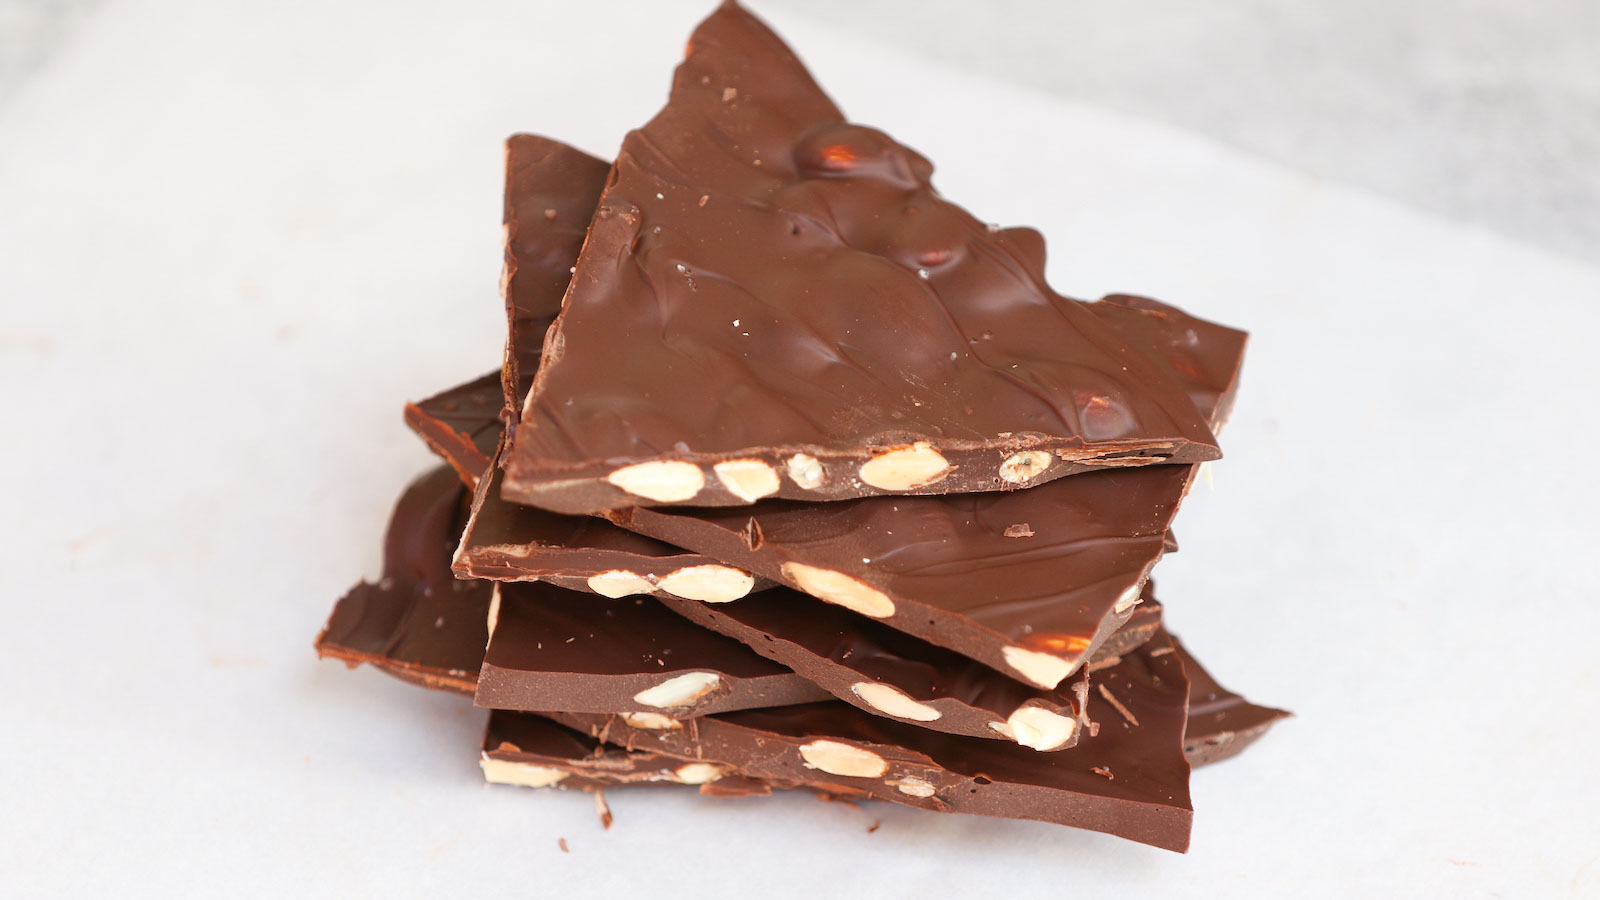 Satisfy your sweet tooth with homemade almond bark made with your choice of dark or white chocolate. Use high-quality chocolate chips or bars for the very best Chocolate Almond Bark. It’s a great treat that’s perfect for holiday gifts!